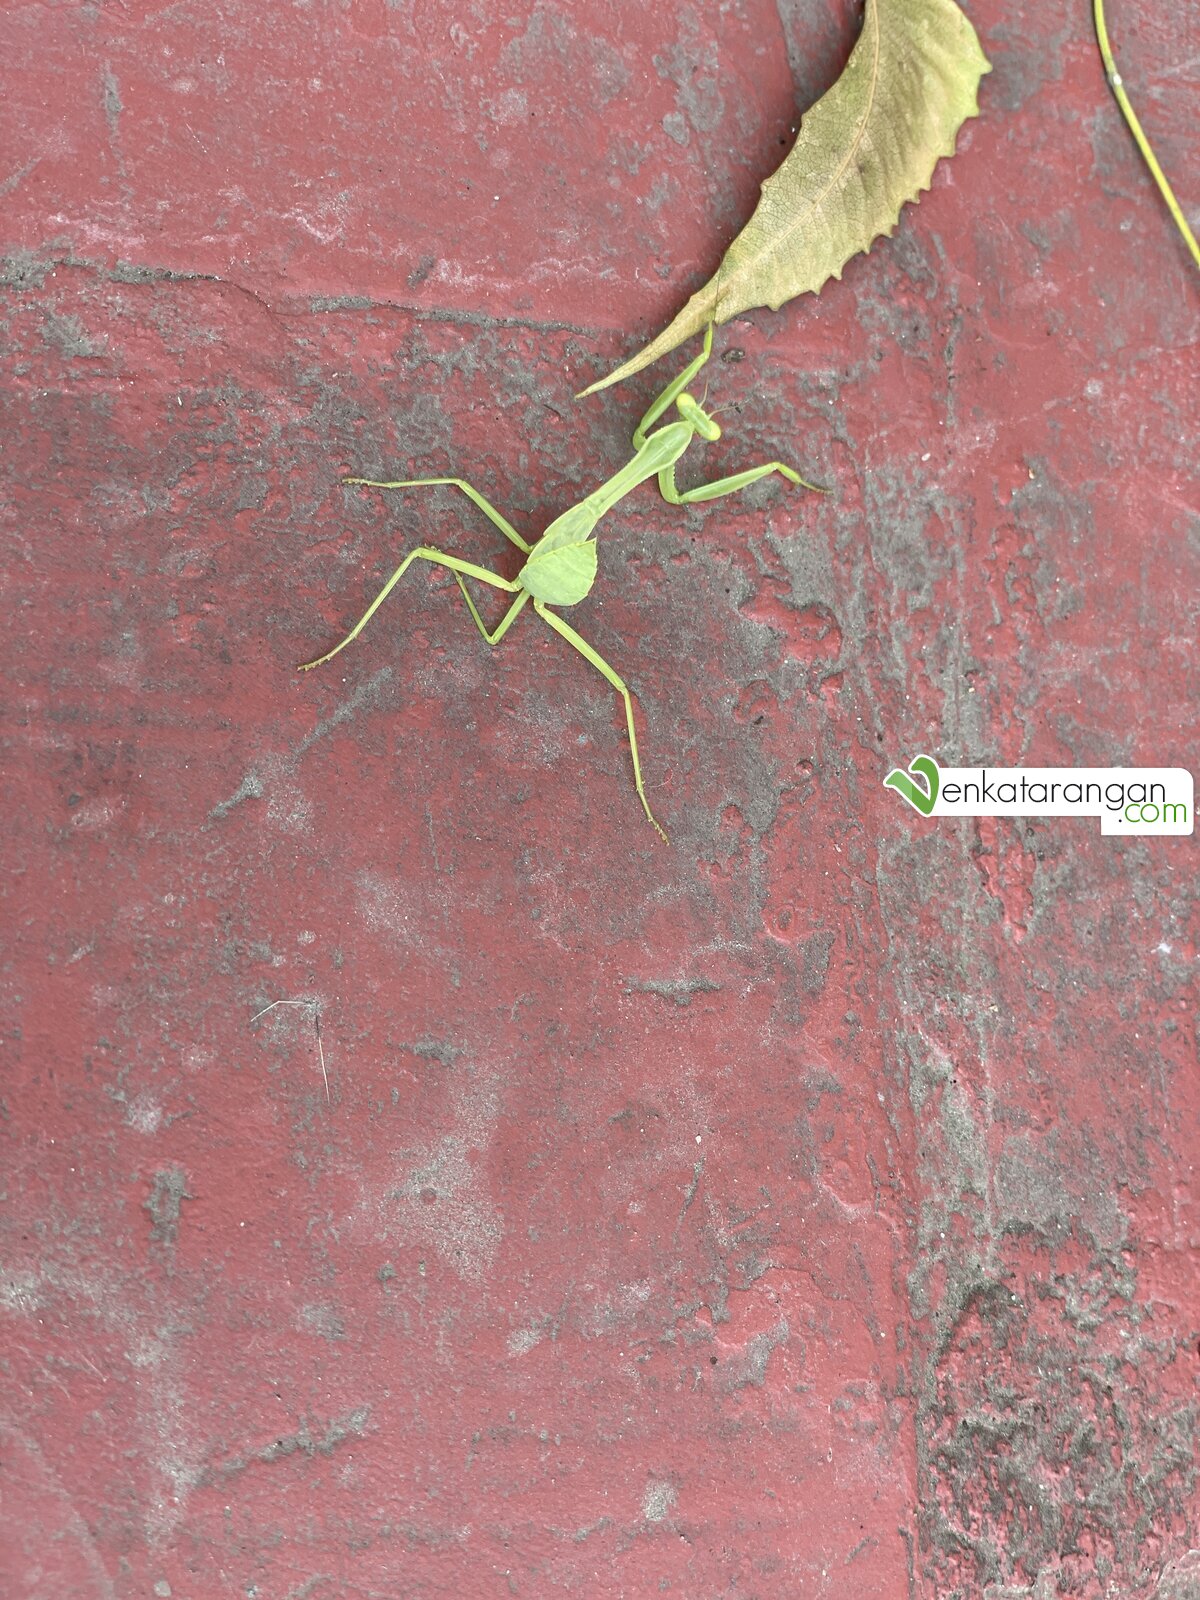 mantises protect themselves by camouflage, most species being cryptically colored to resemble foliage or other background